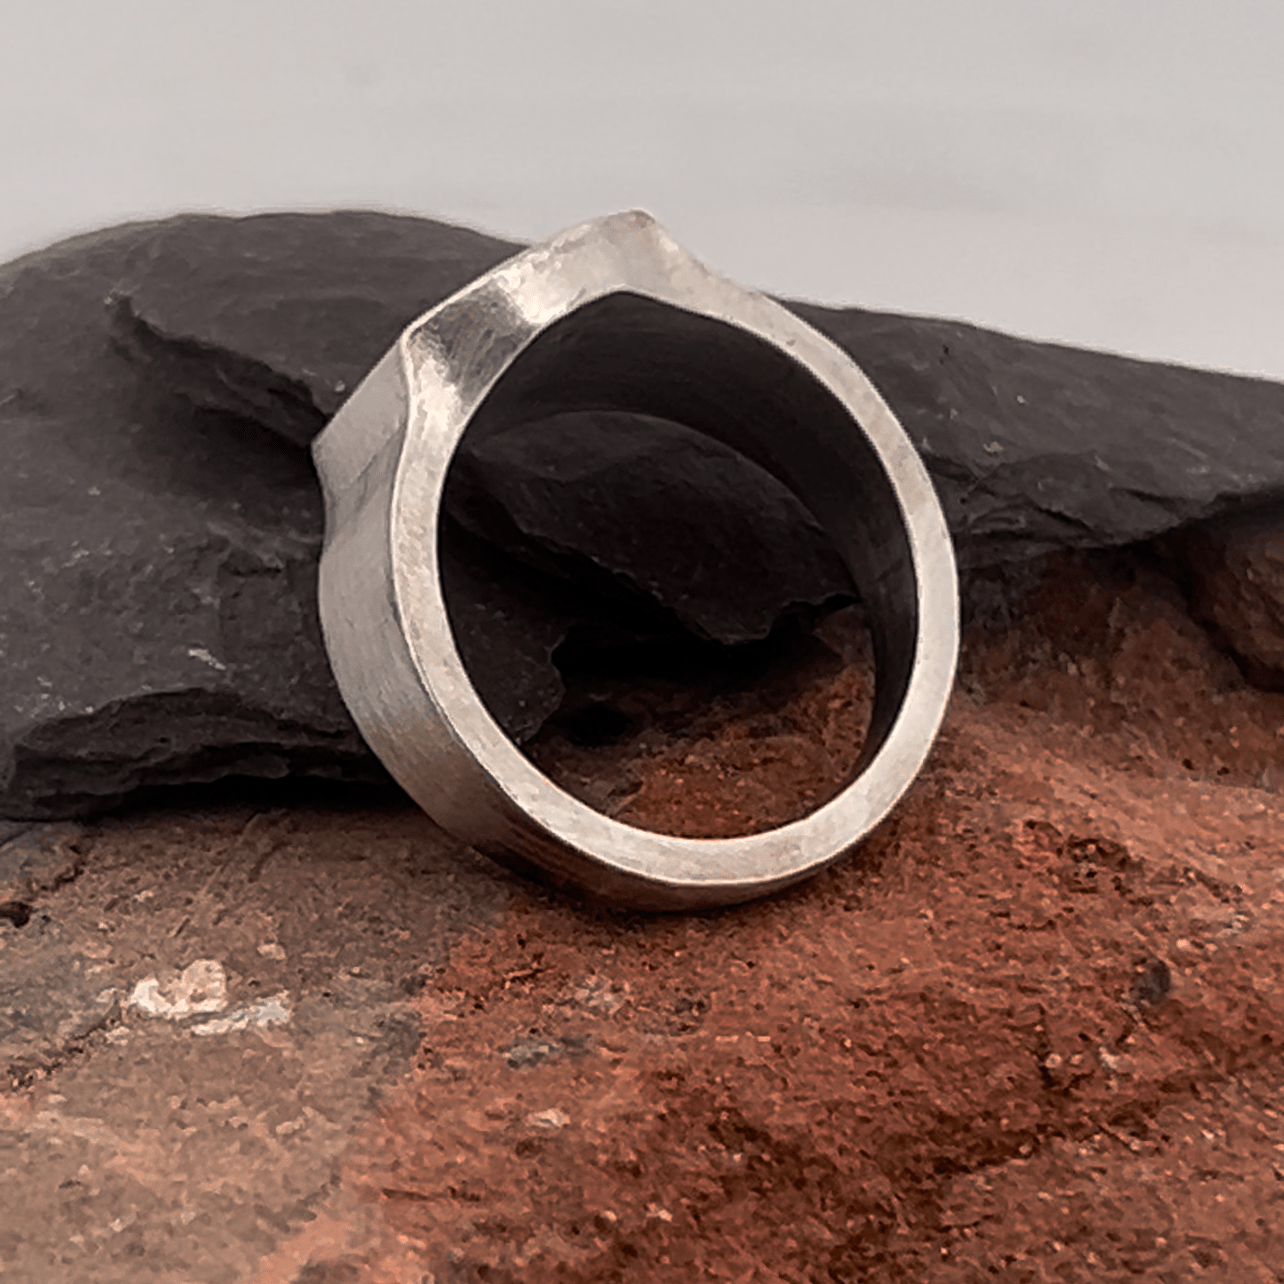 Fingerprint Ring - Signet Ring by Chris Parry Jewellery